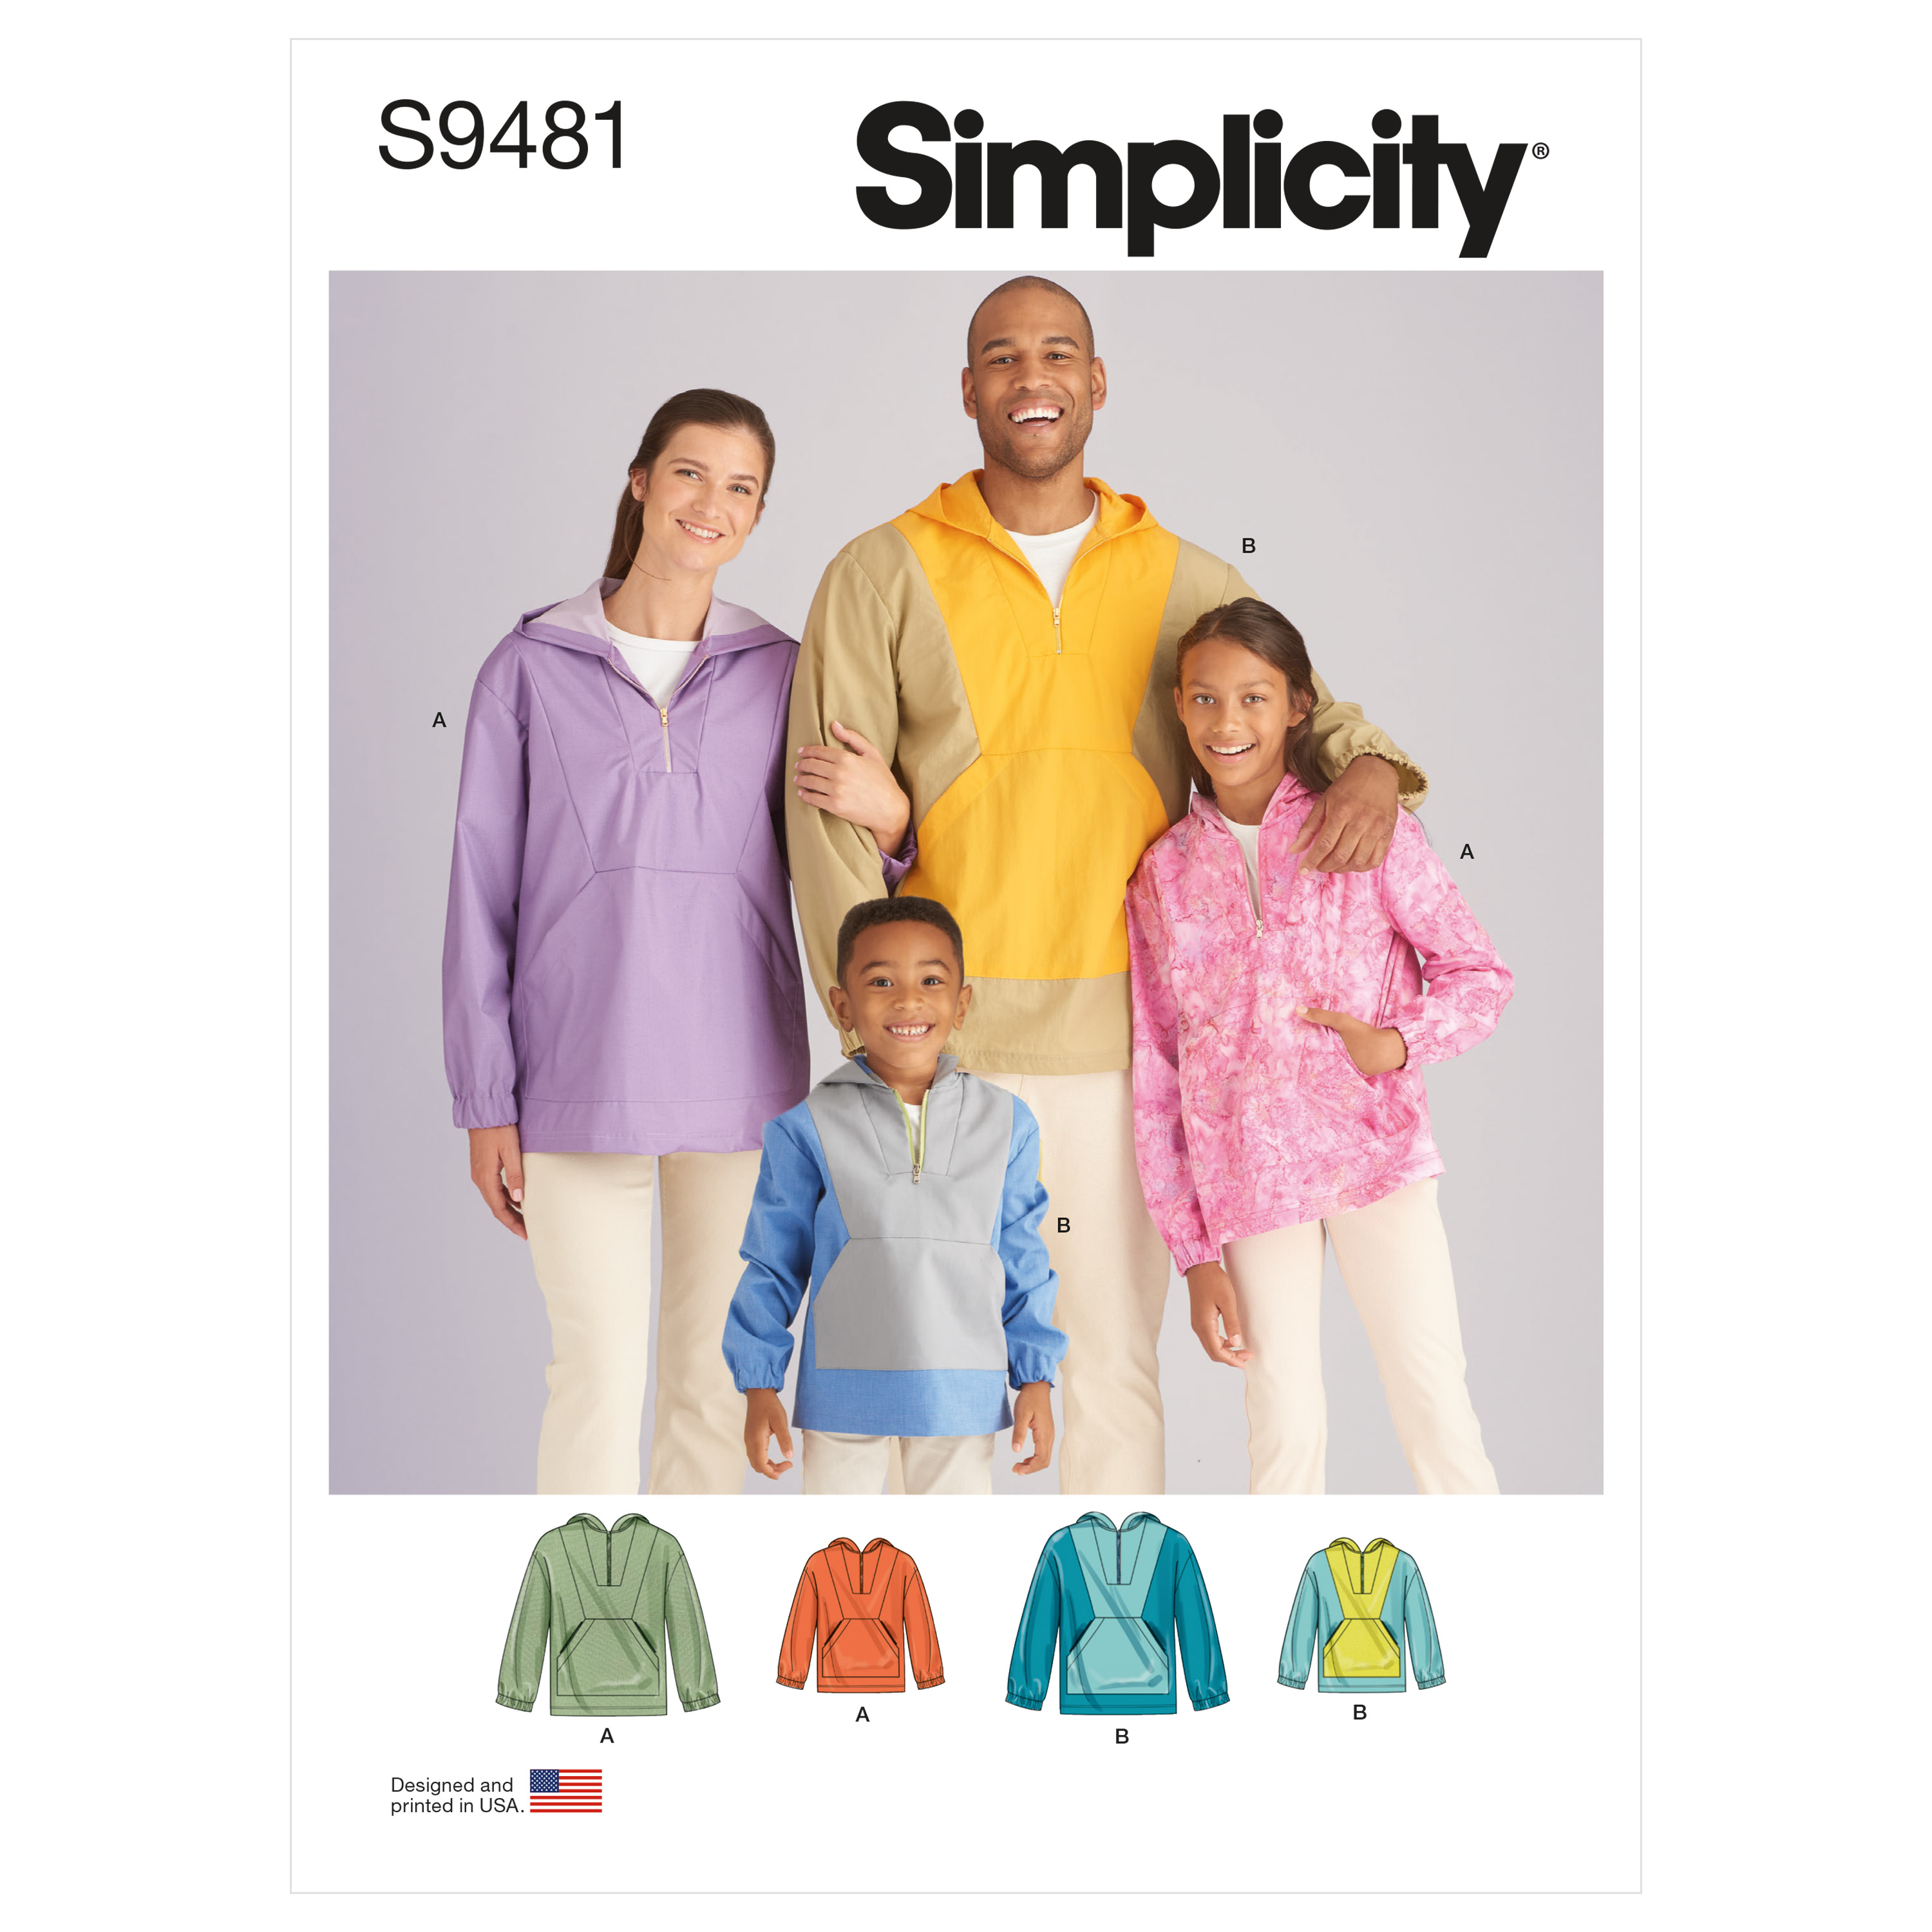 Simplicity 9481 Unisex Top Sized for Children, Teens, and Adults